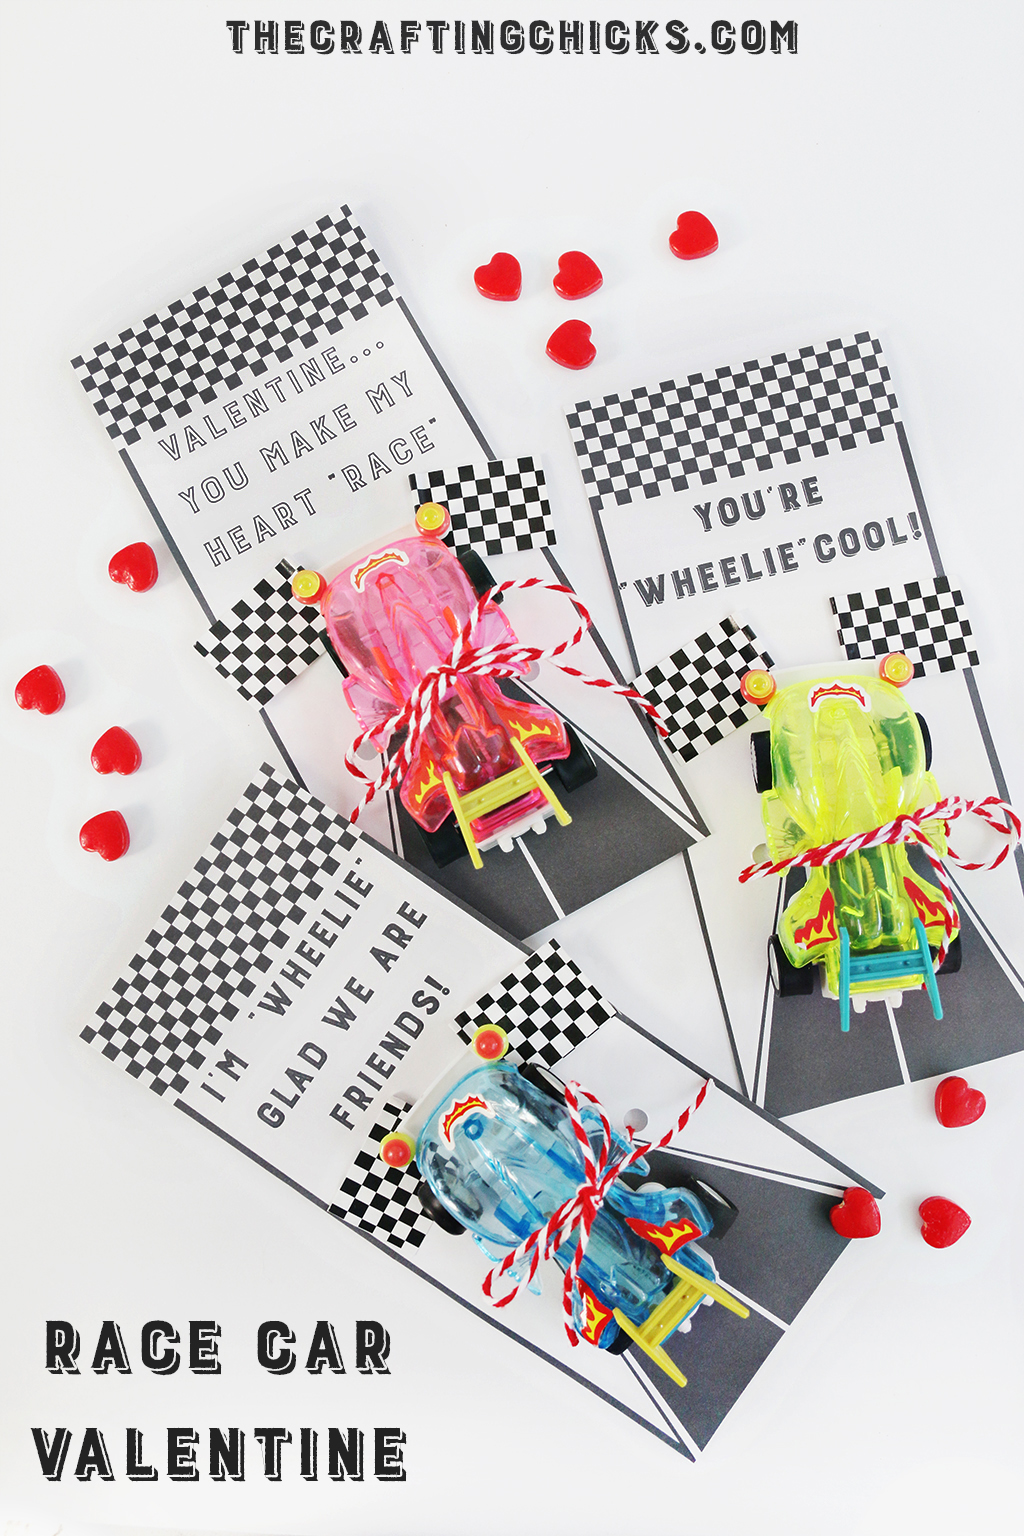 Race Car Valentines The Crafting Chicks